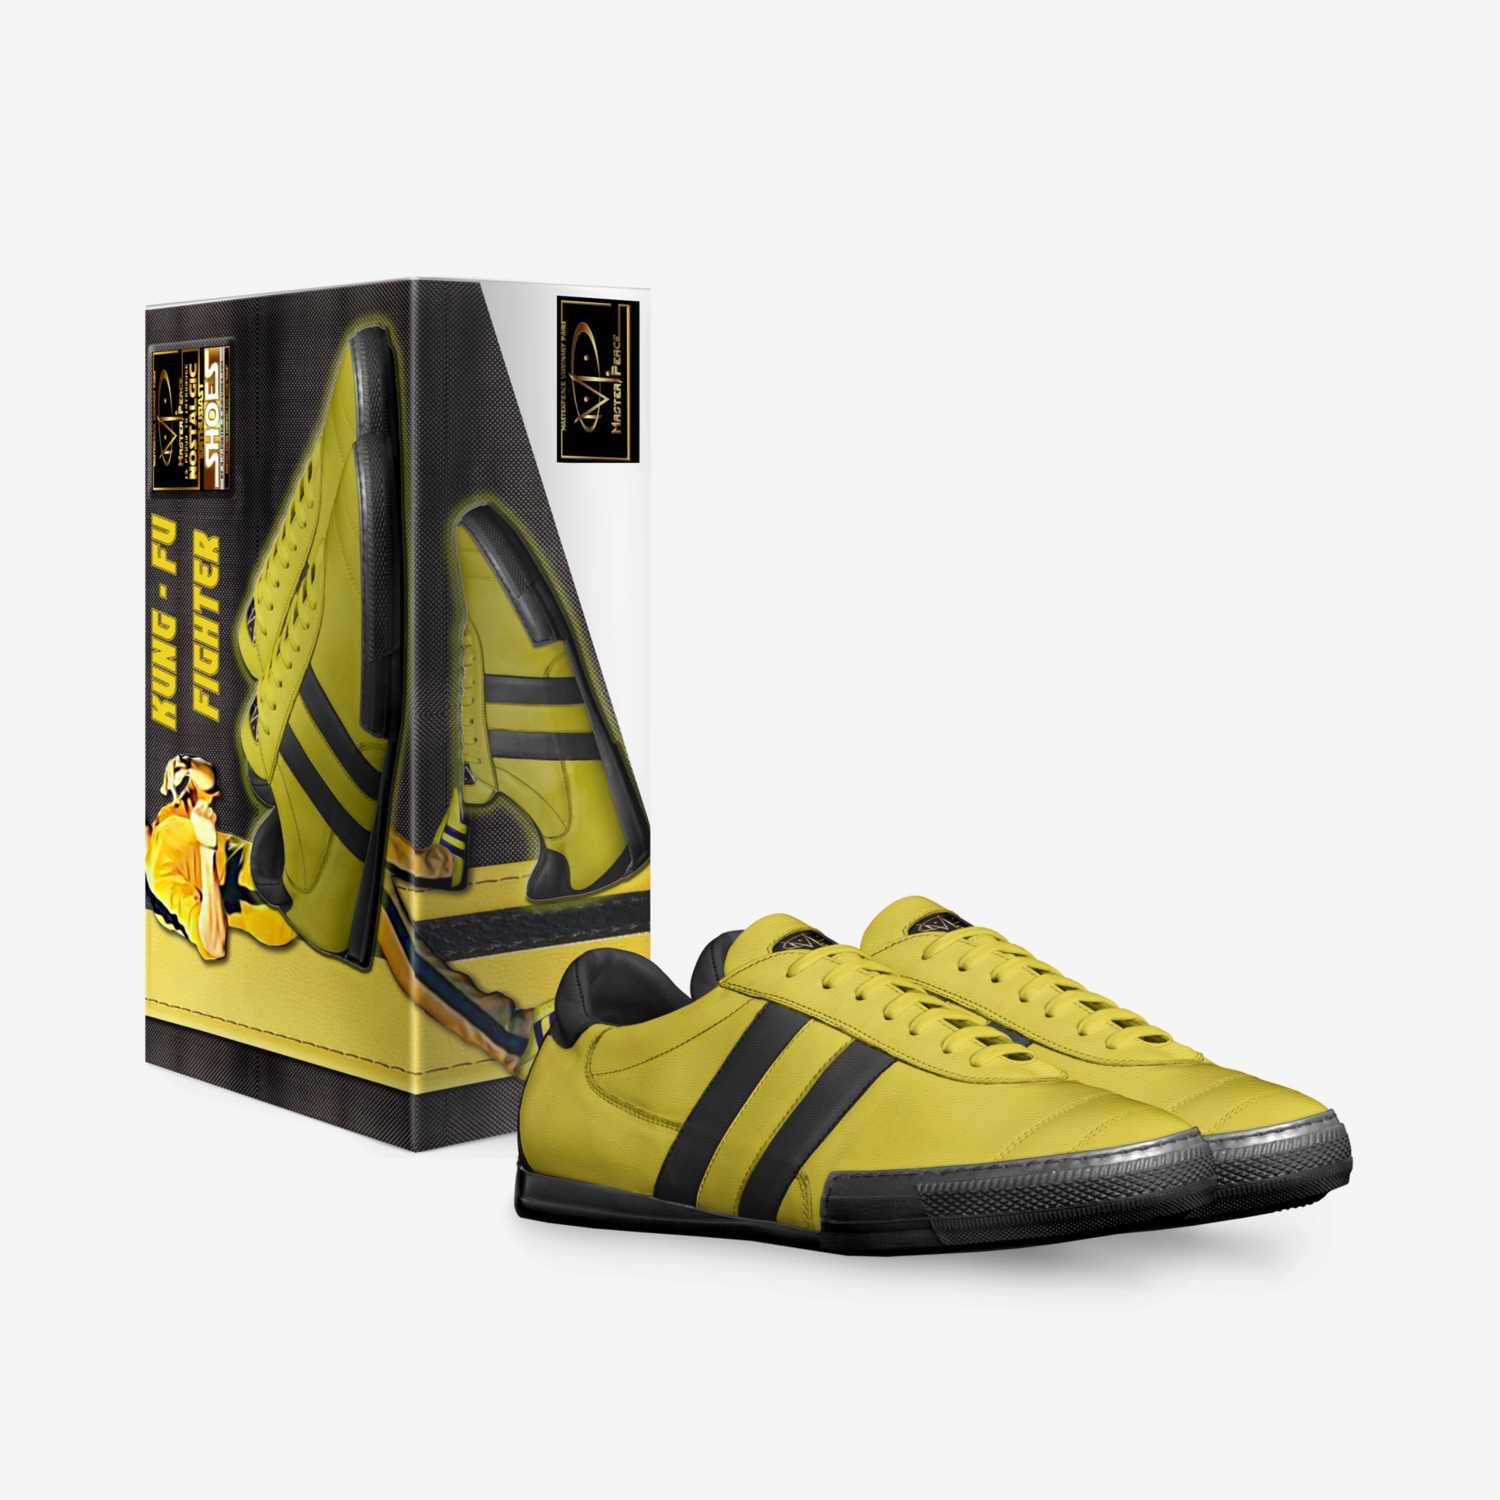 MVP-KungFu Fighter custom made in Italy shoes by Michael Porter | Box view